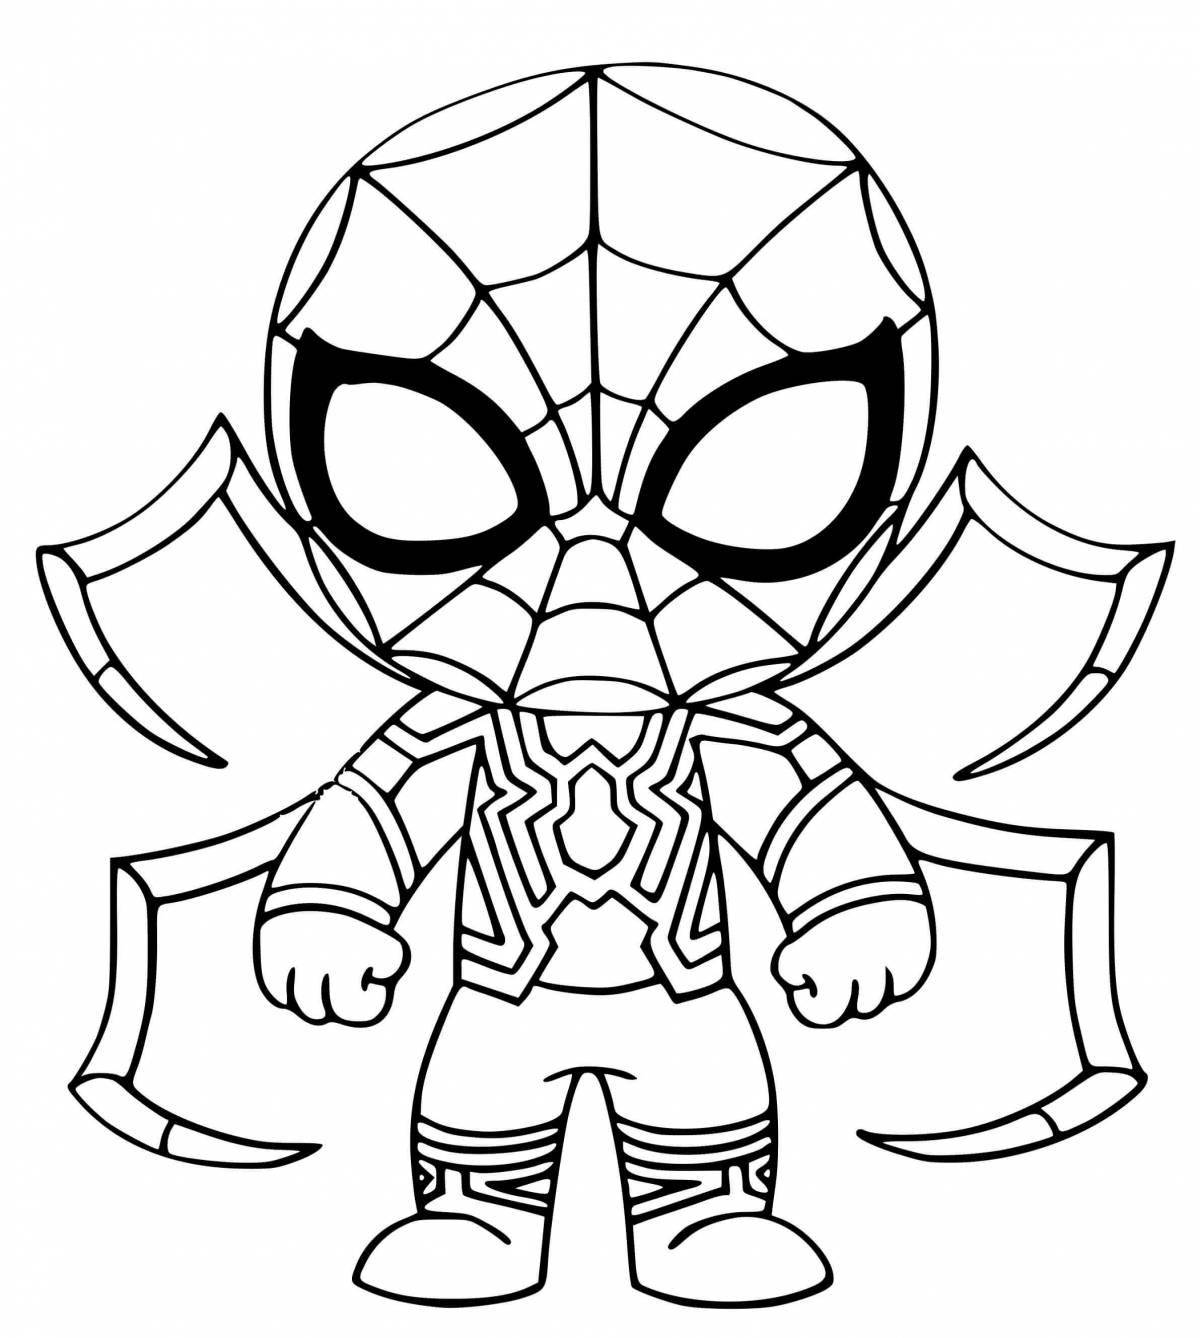 Spider-man and iron-man fun coloring book for kids